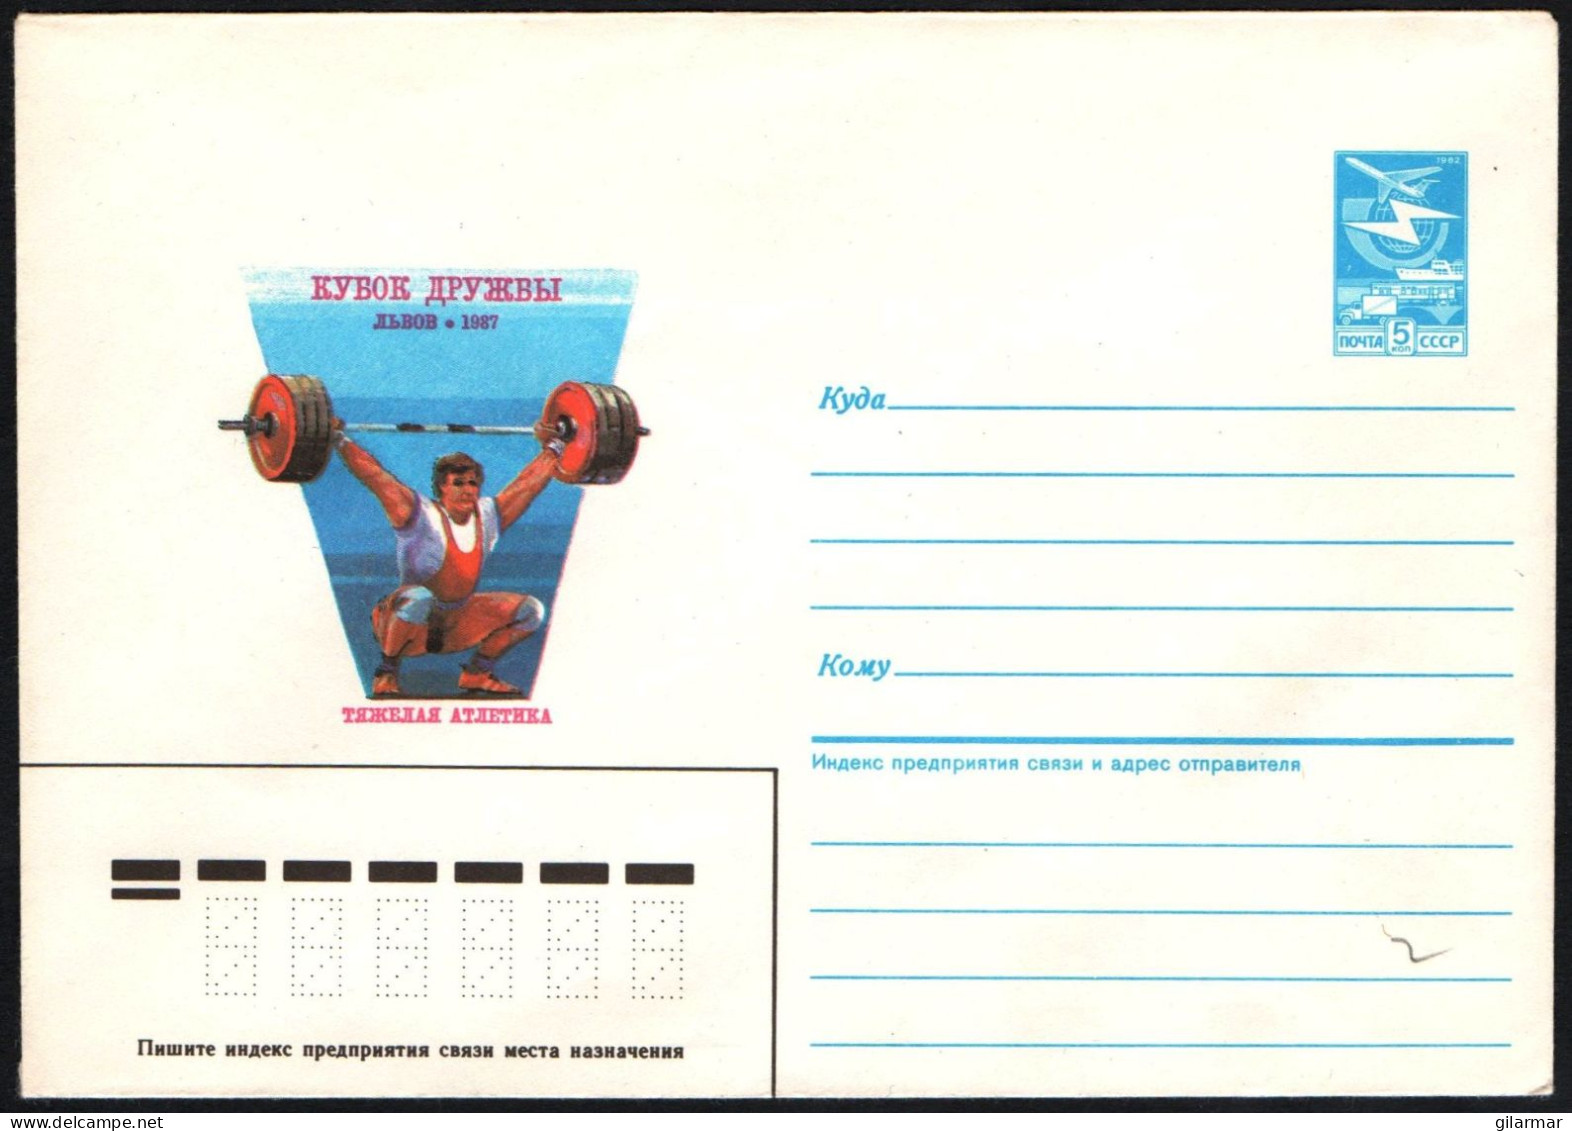 SOVIET UNION 1987 - FRIENDSHIP CUP - WEIGHTLIFTING - MINT POSTAL STATIONARY - G - Pesistica